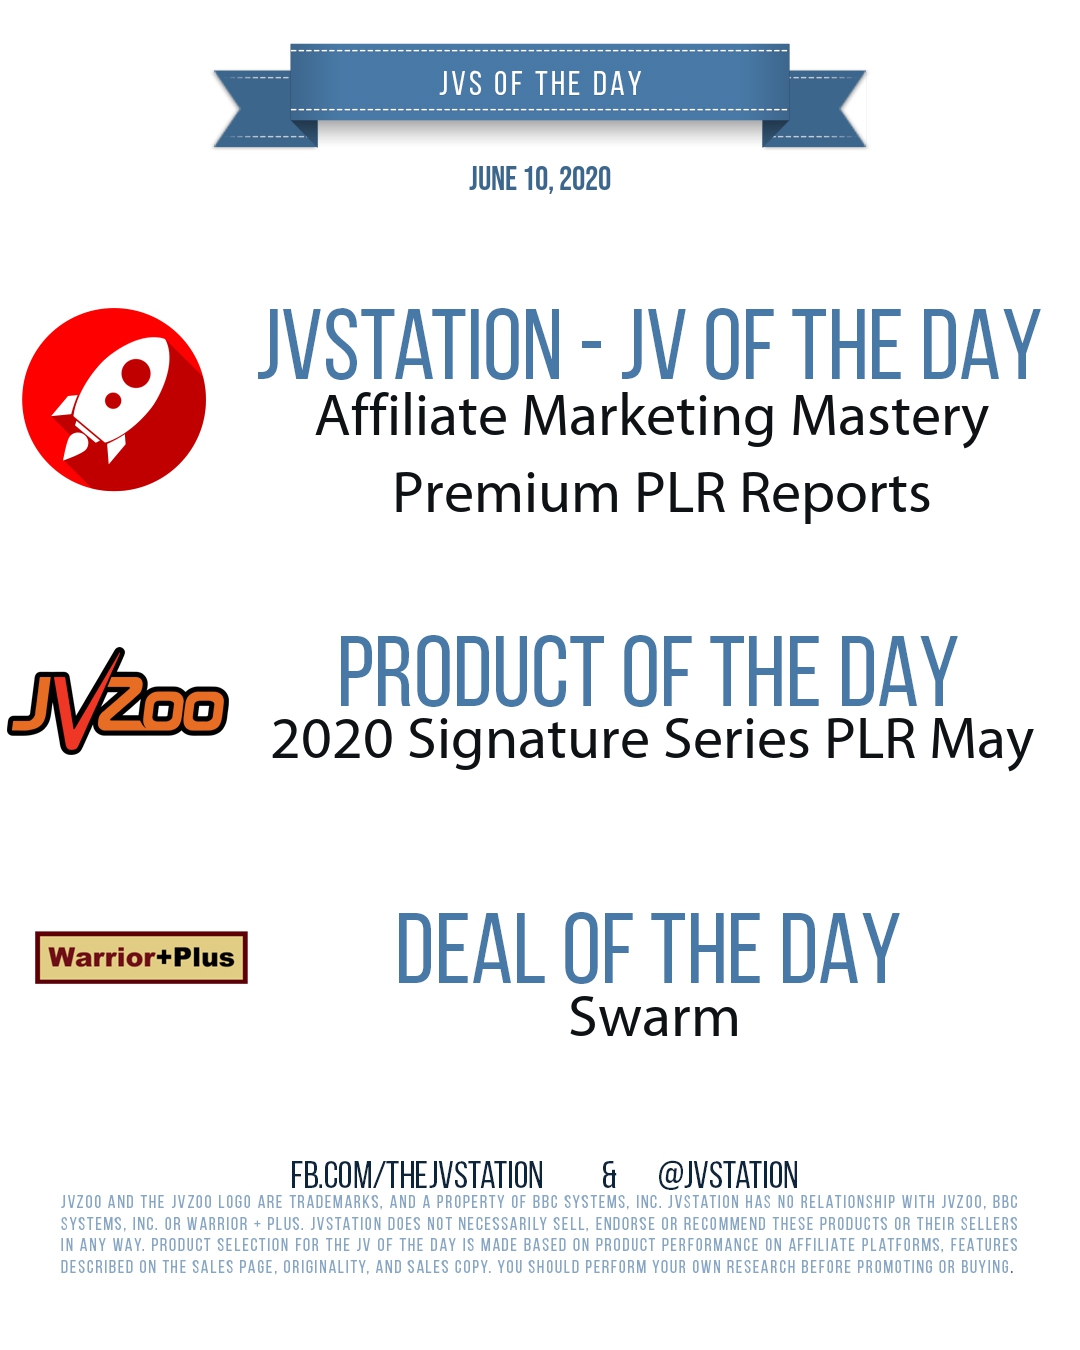 JVs of the day - June 10, 2020